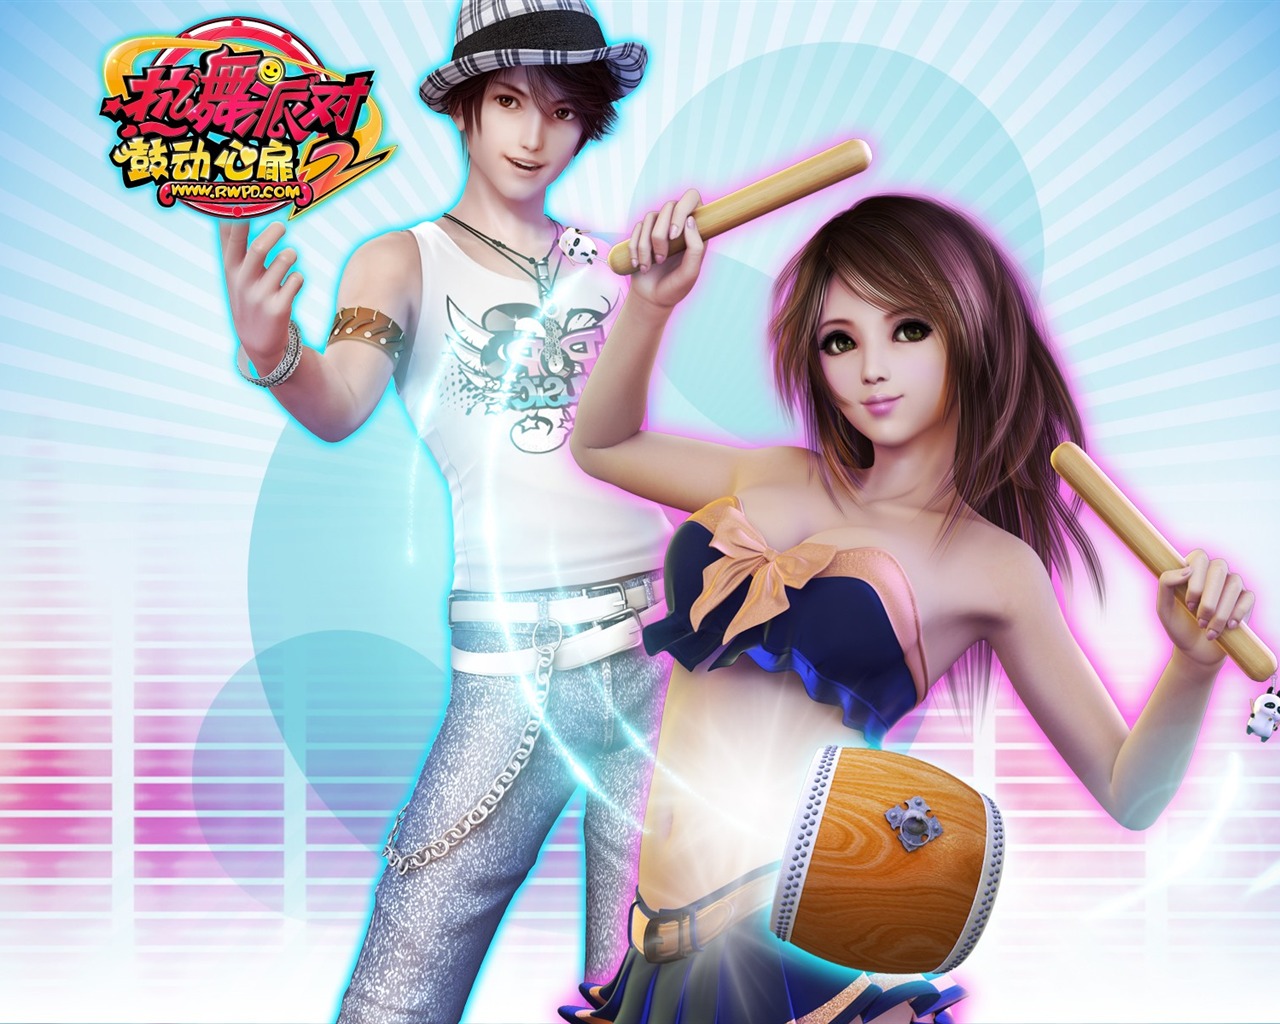 Online game Hot Dance Party II official wallpapers #14 - 1280x1024